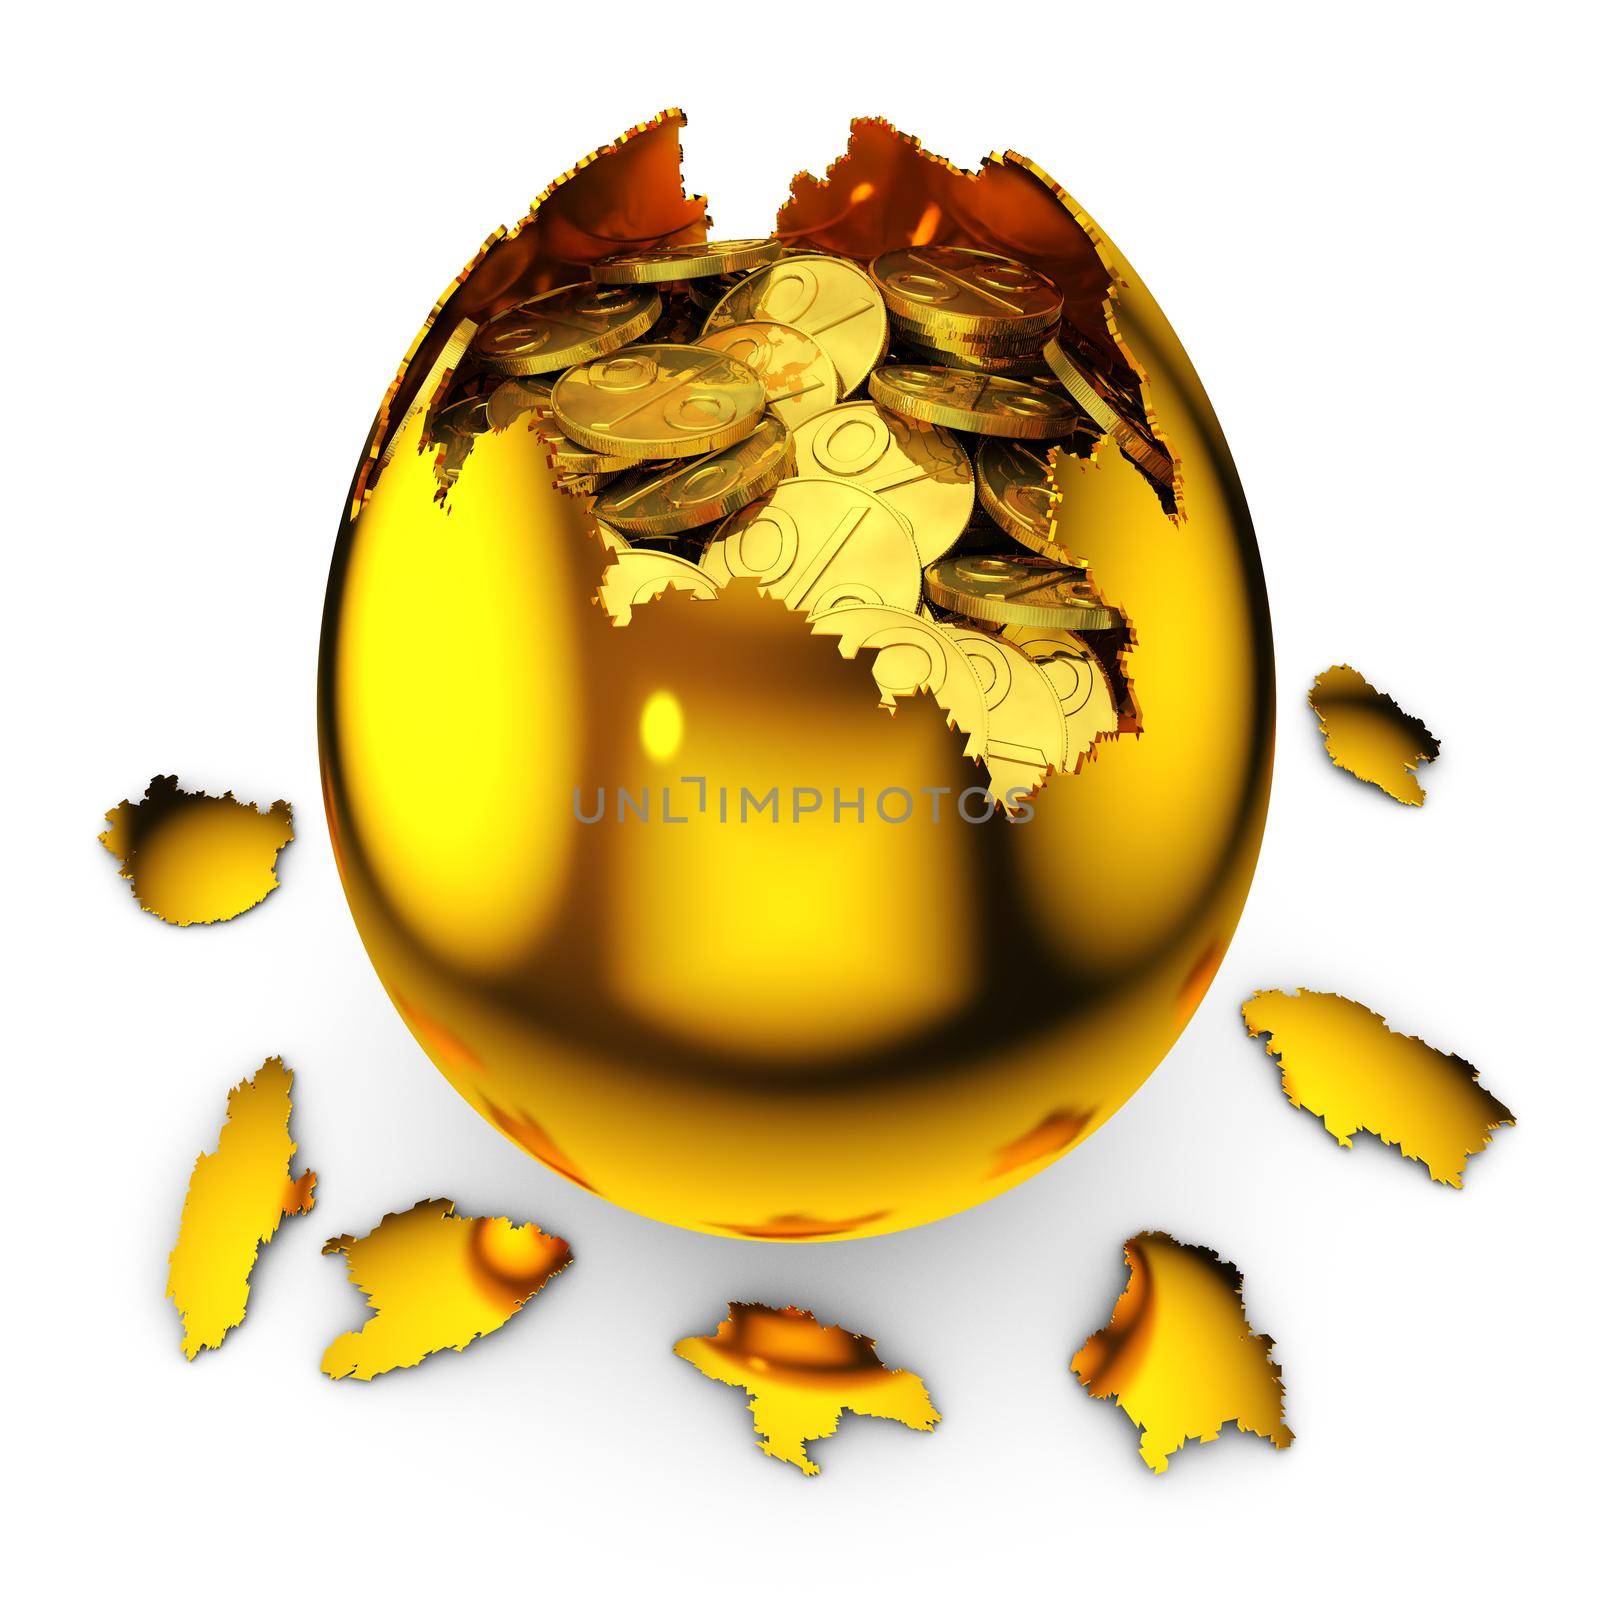 smashed golden egg with percent coins on white background